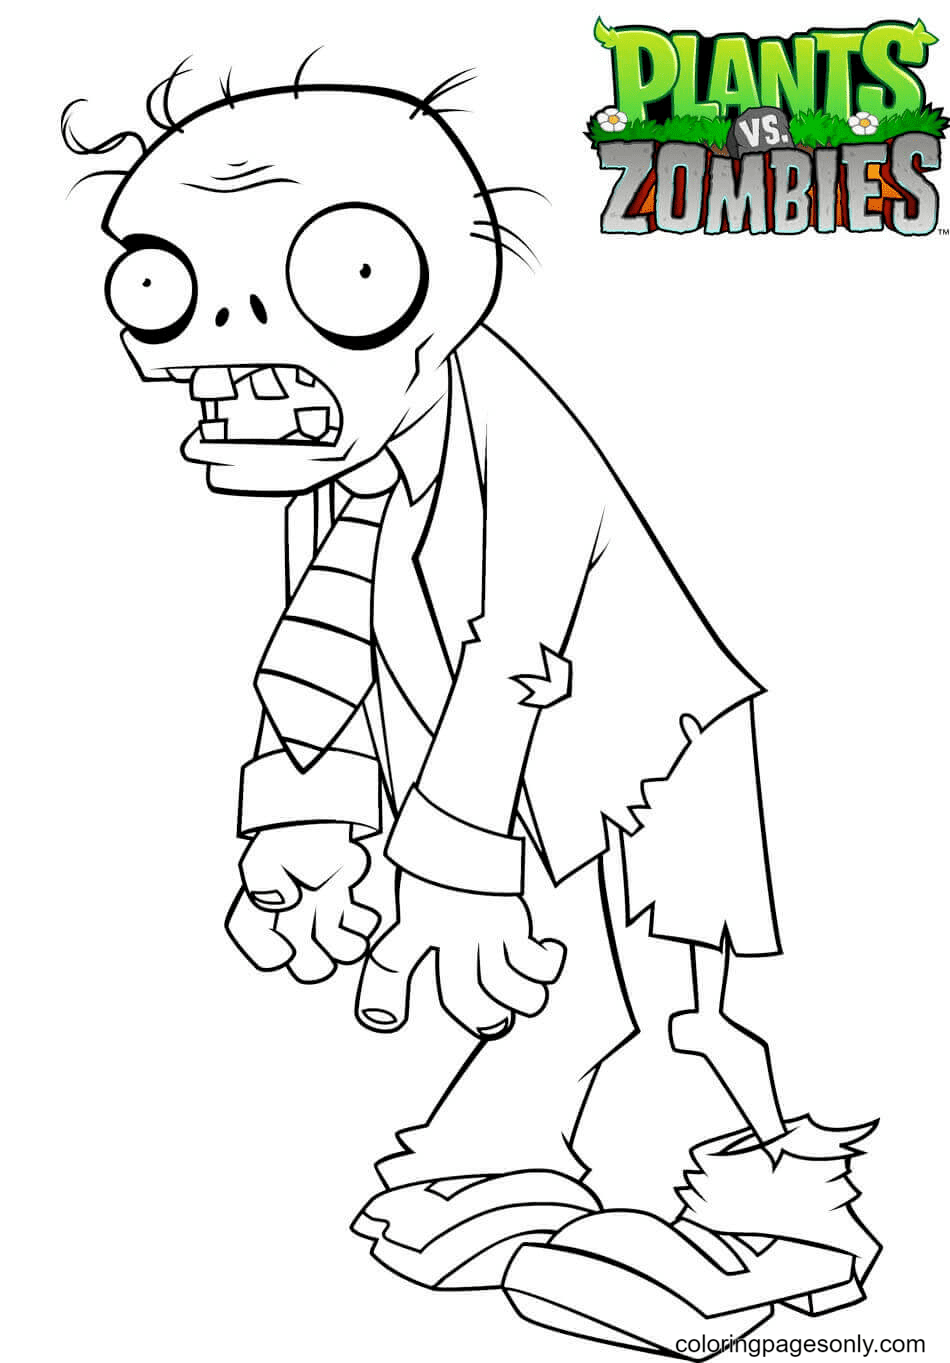 Gatling Pea Zombie Coloring Page